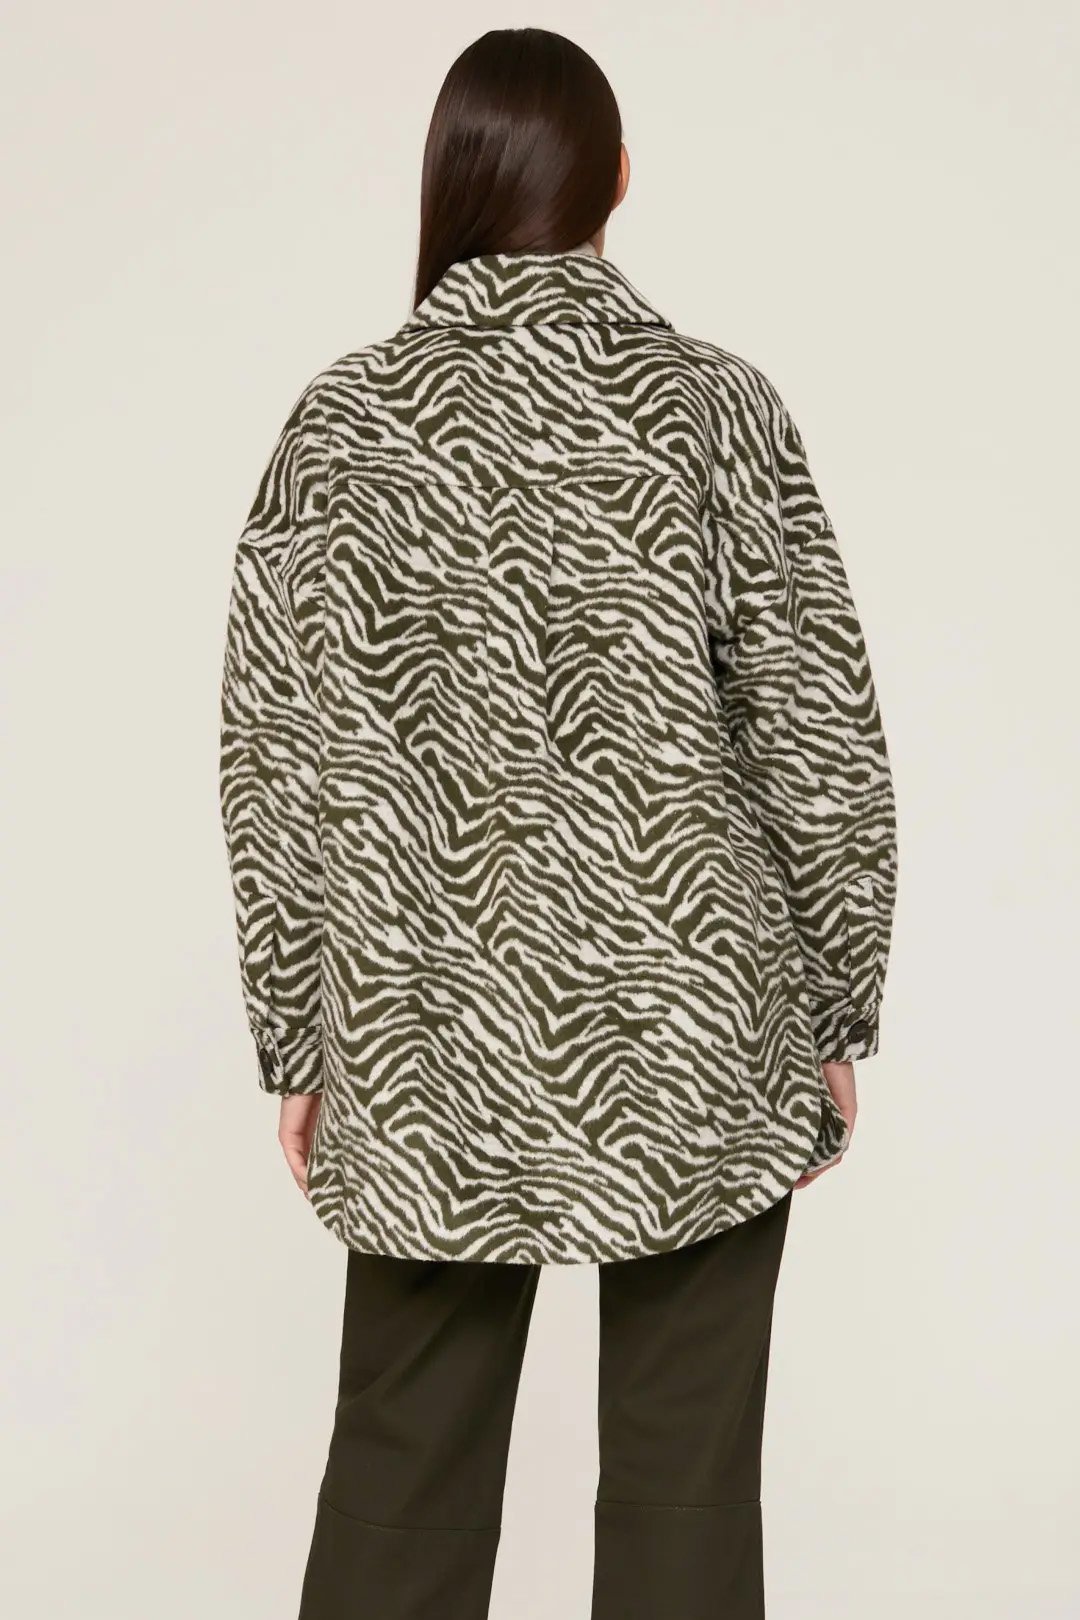 rent the runway fall 2022 green zebra jacket peter som collective